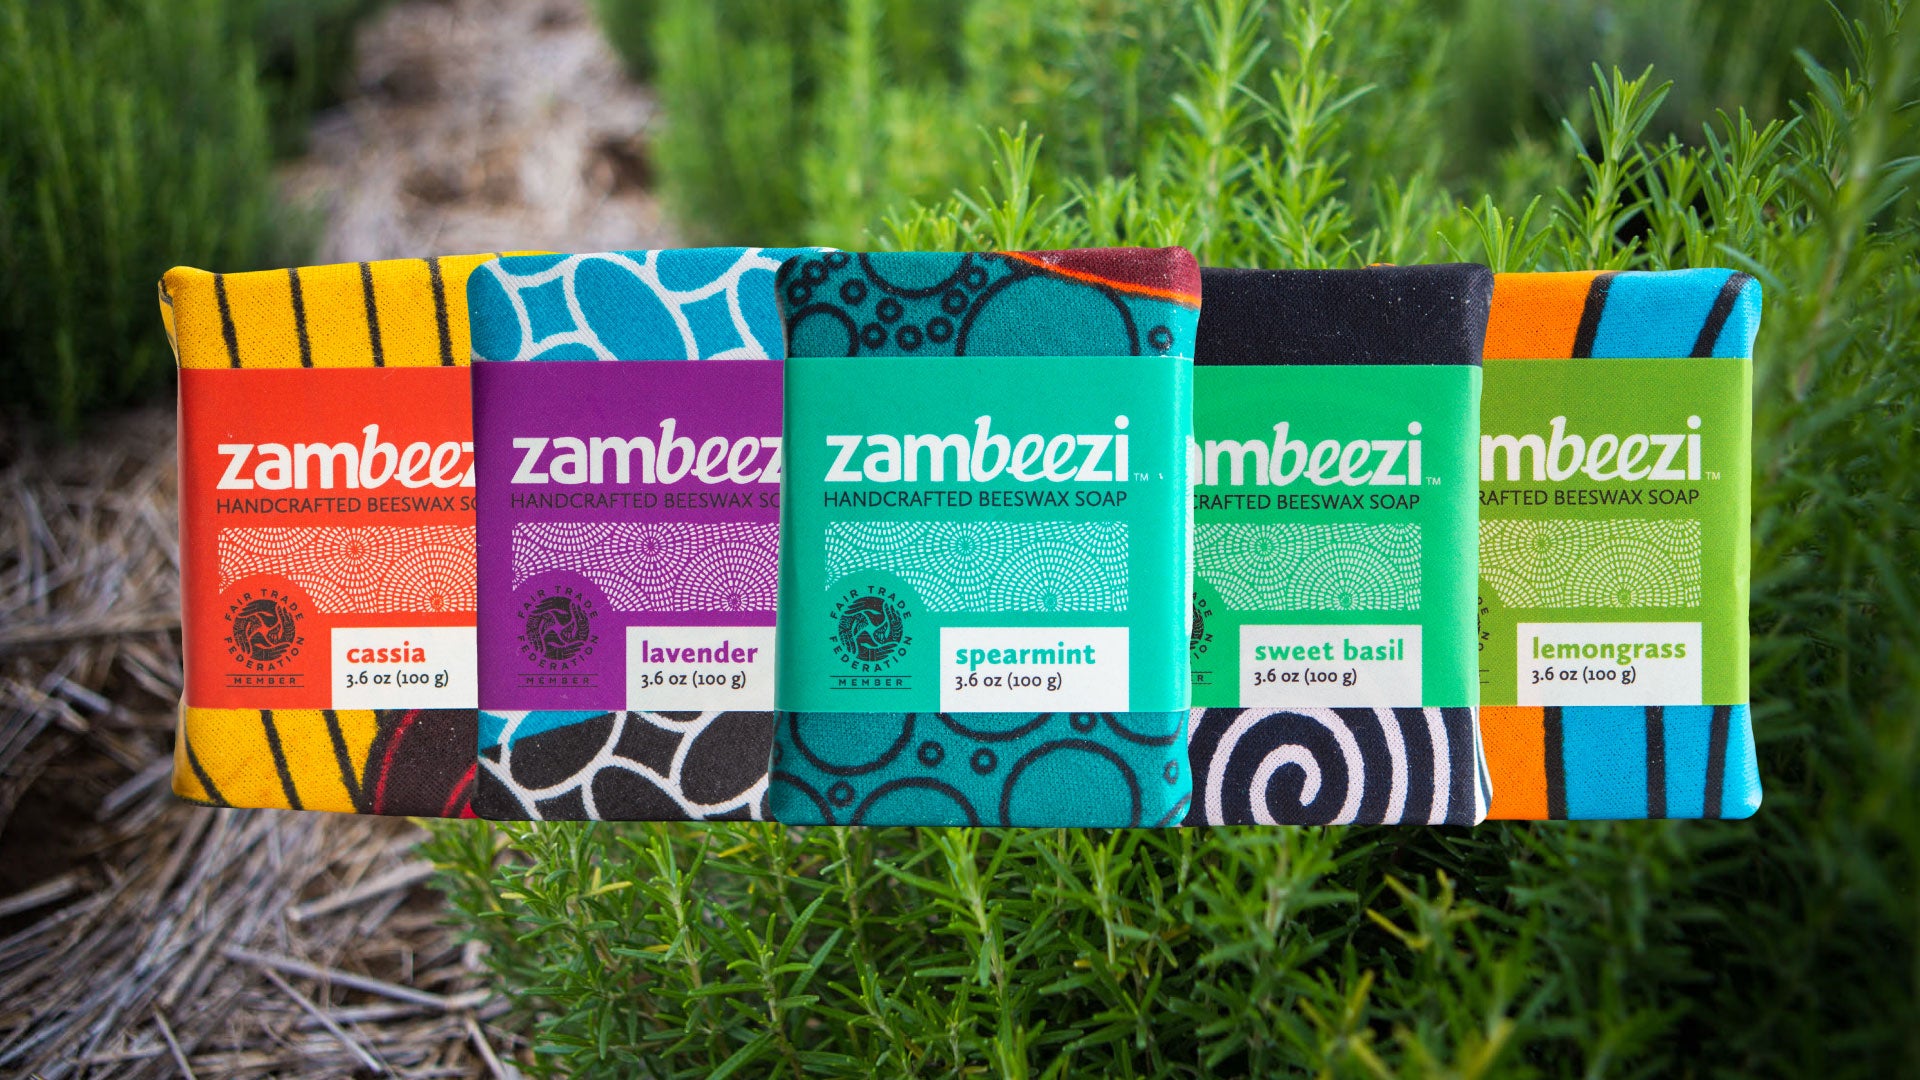 Zambeezi Fair Trade, hand made beeswax soap is crafted from sustainable palm kernel oil